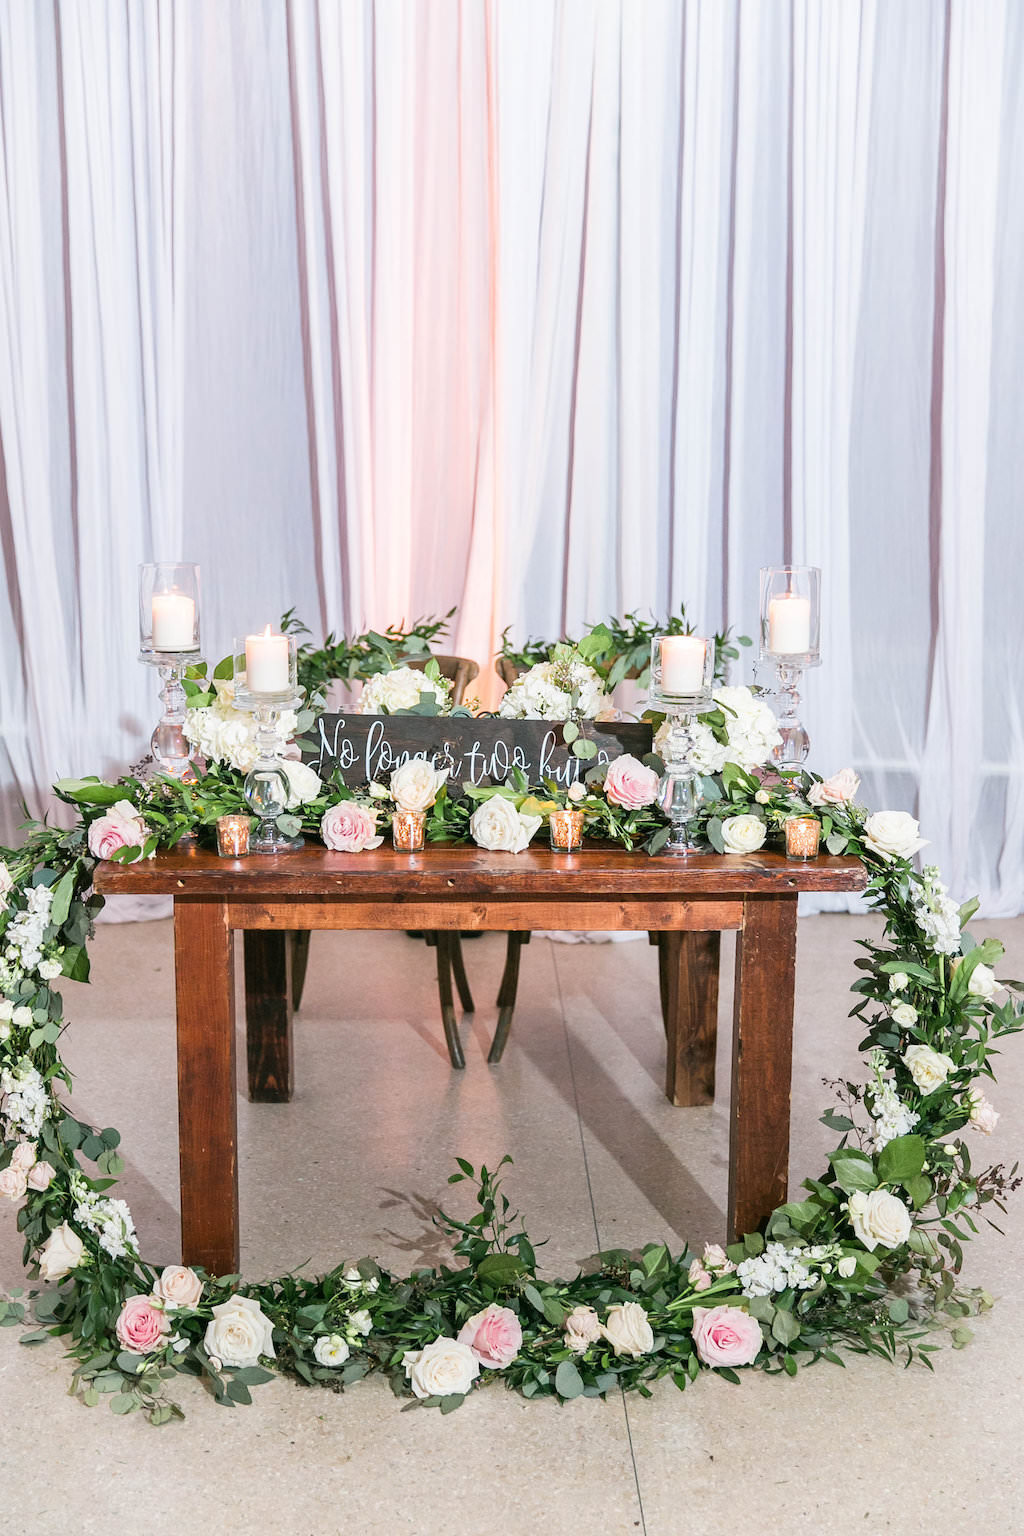 Wedding Reception Garden Inspired Decor, Wooden Sweetheart Table with Circular Greenery Garland with Ivory and Blush Pink Roses, Tall Glass Candlesticks and Wooden Sign | Tampa Bay Rentals A Chair Affair